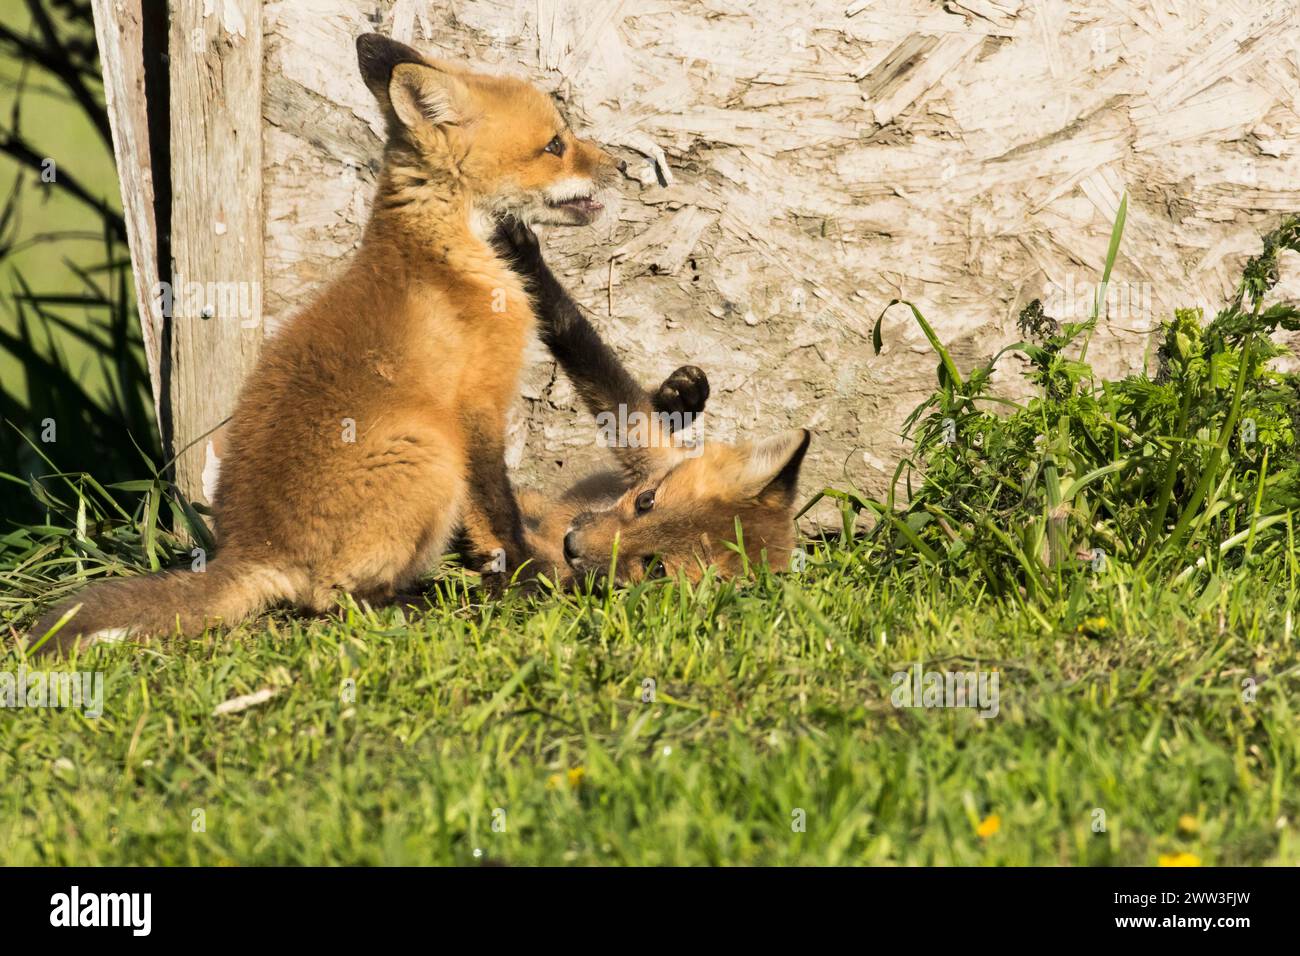 Red fox. Vulpes vulpes. Red fox cubs playing together in a meadow. Province of Quebec. Canada Stock Photo